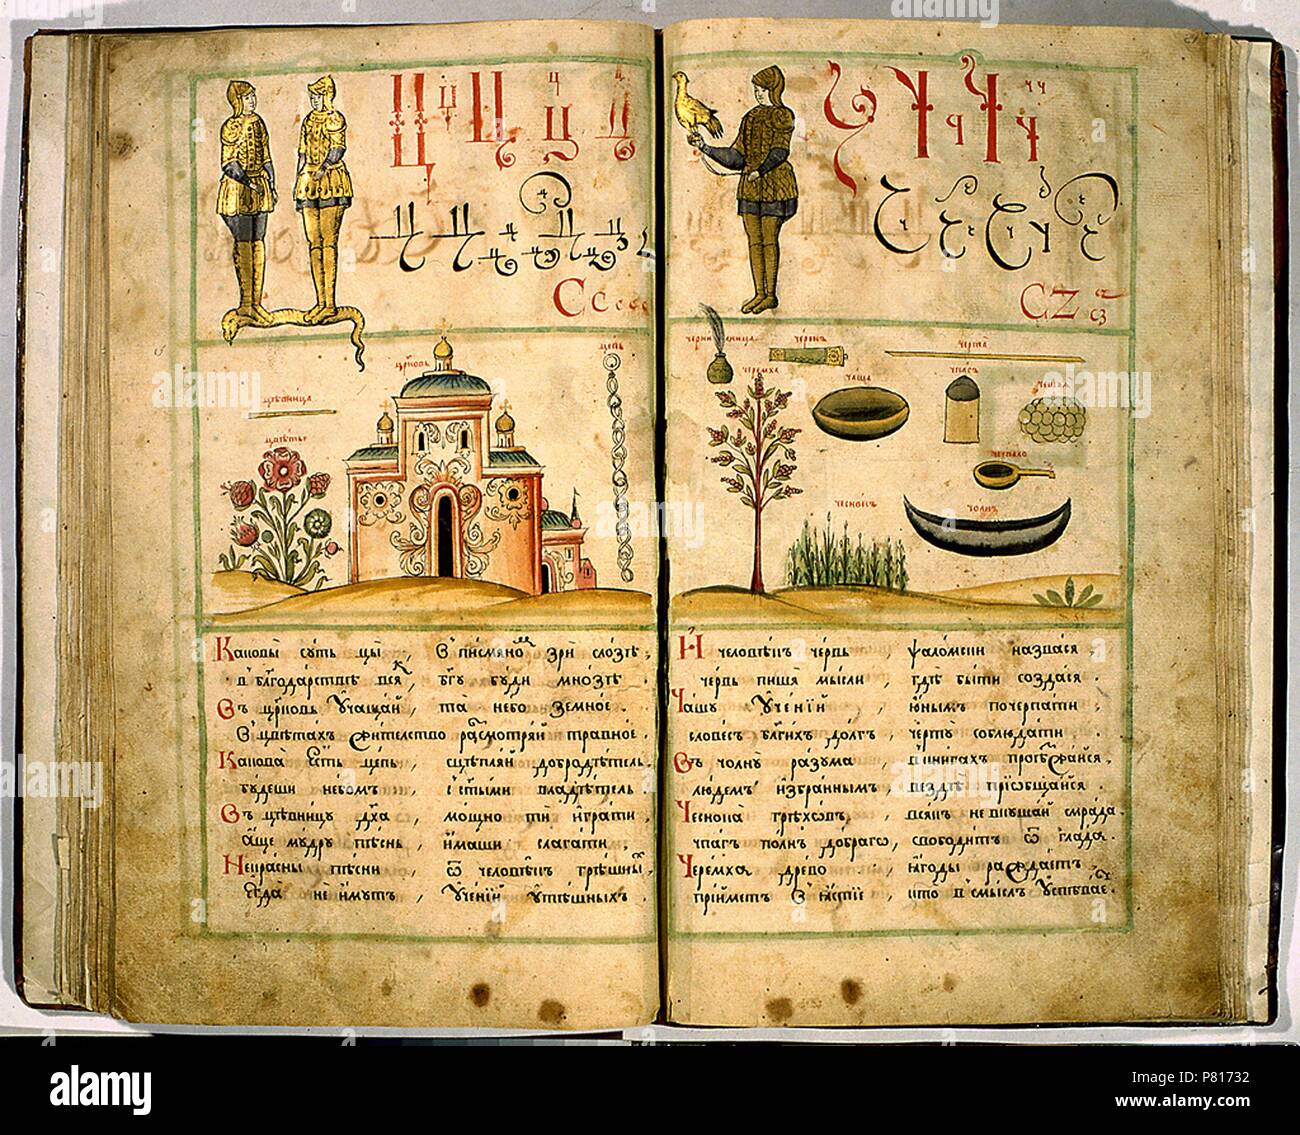 First Russian Alphabet Book by Karion Istomin. Museum: State History Museum, Moscow. Stock Photo